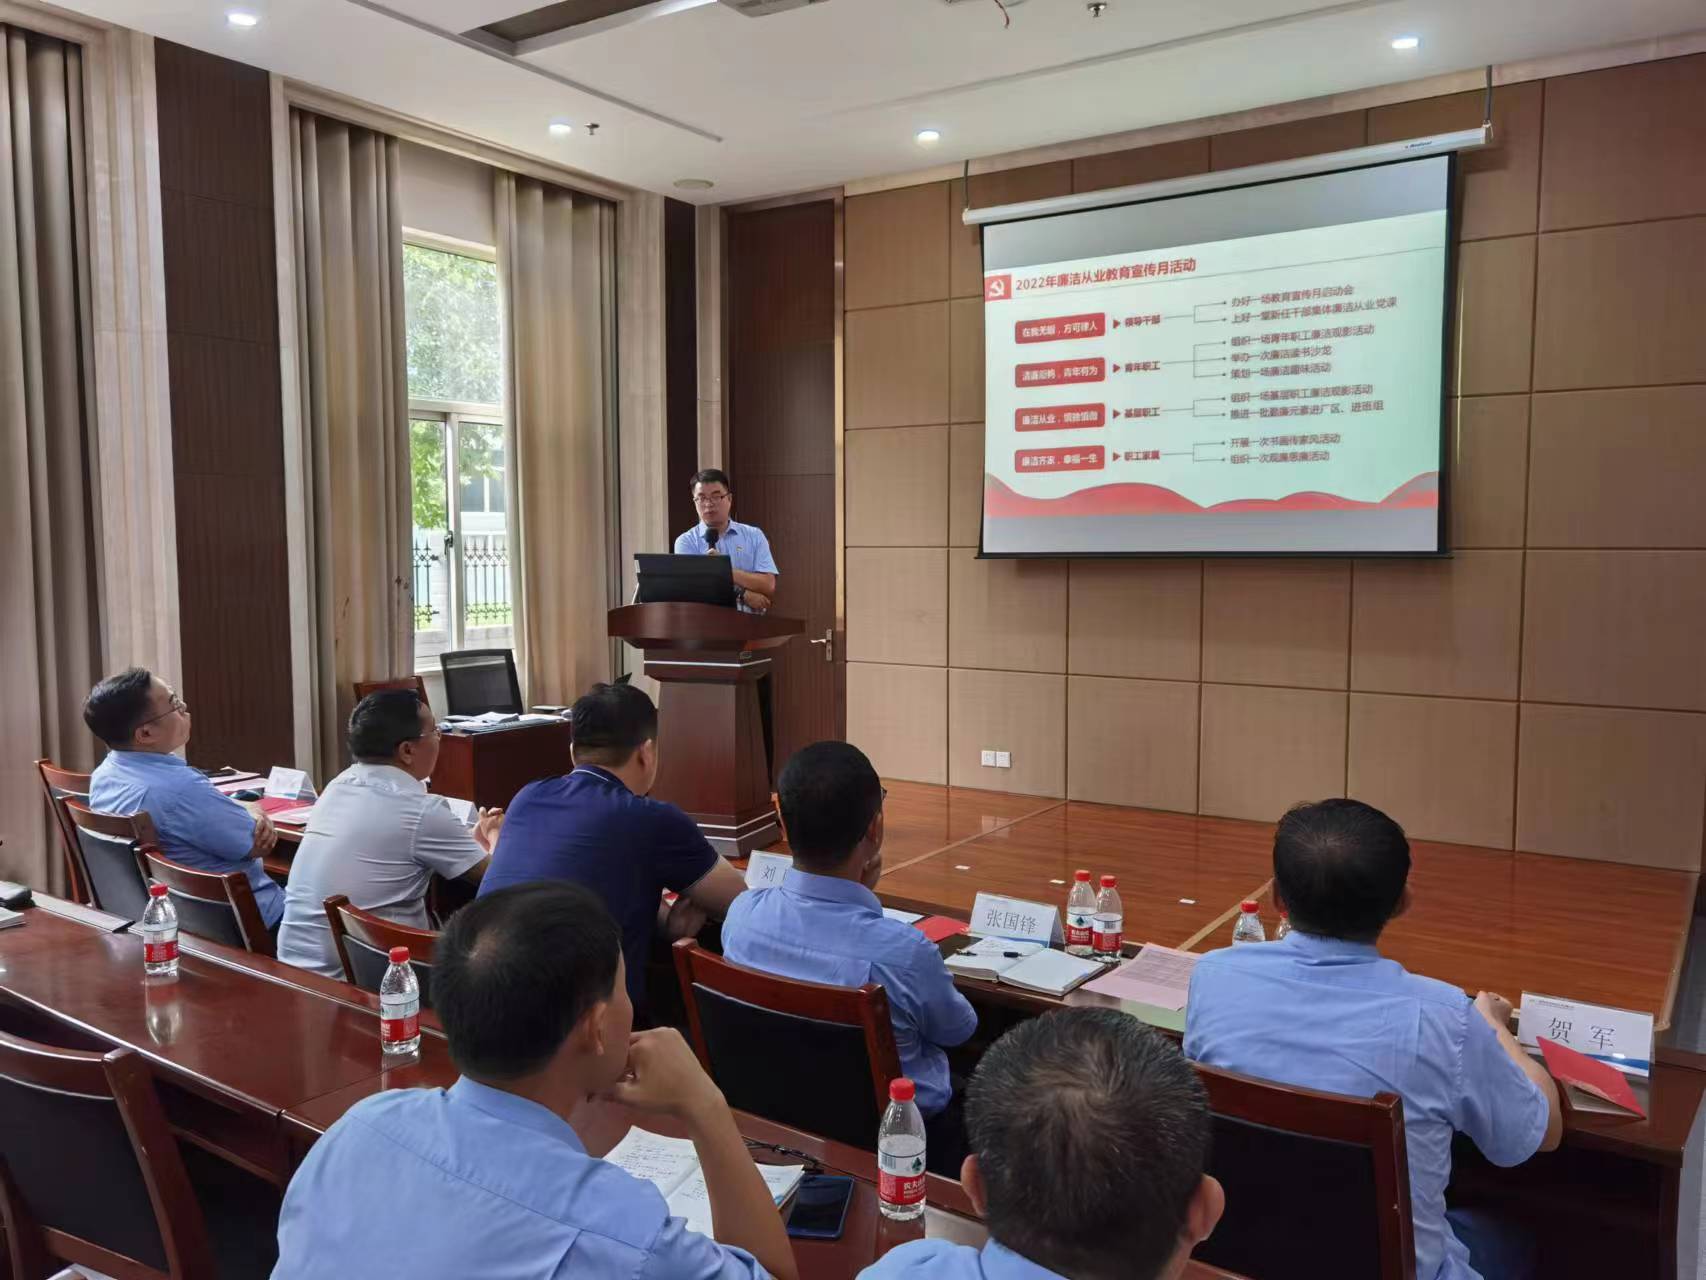 【Party Building Garden】 "Life is a long road, integrity is always accompanied" - Luoyang Jinlu held the 2022 Integrity Education Publicity Month Kick-off Meeting